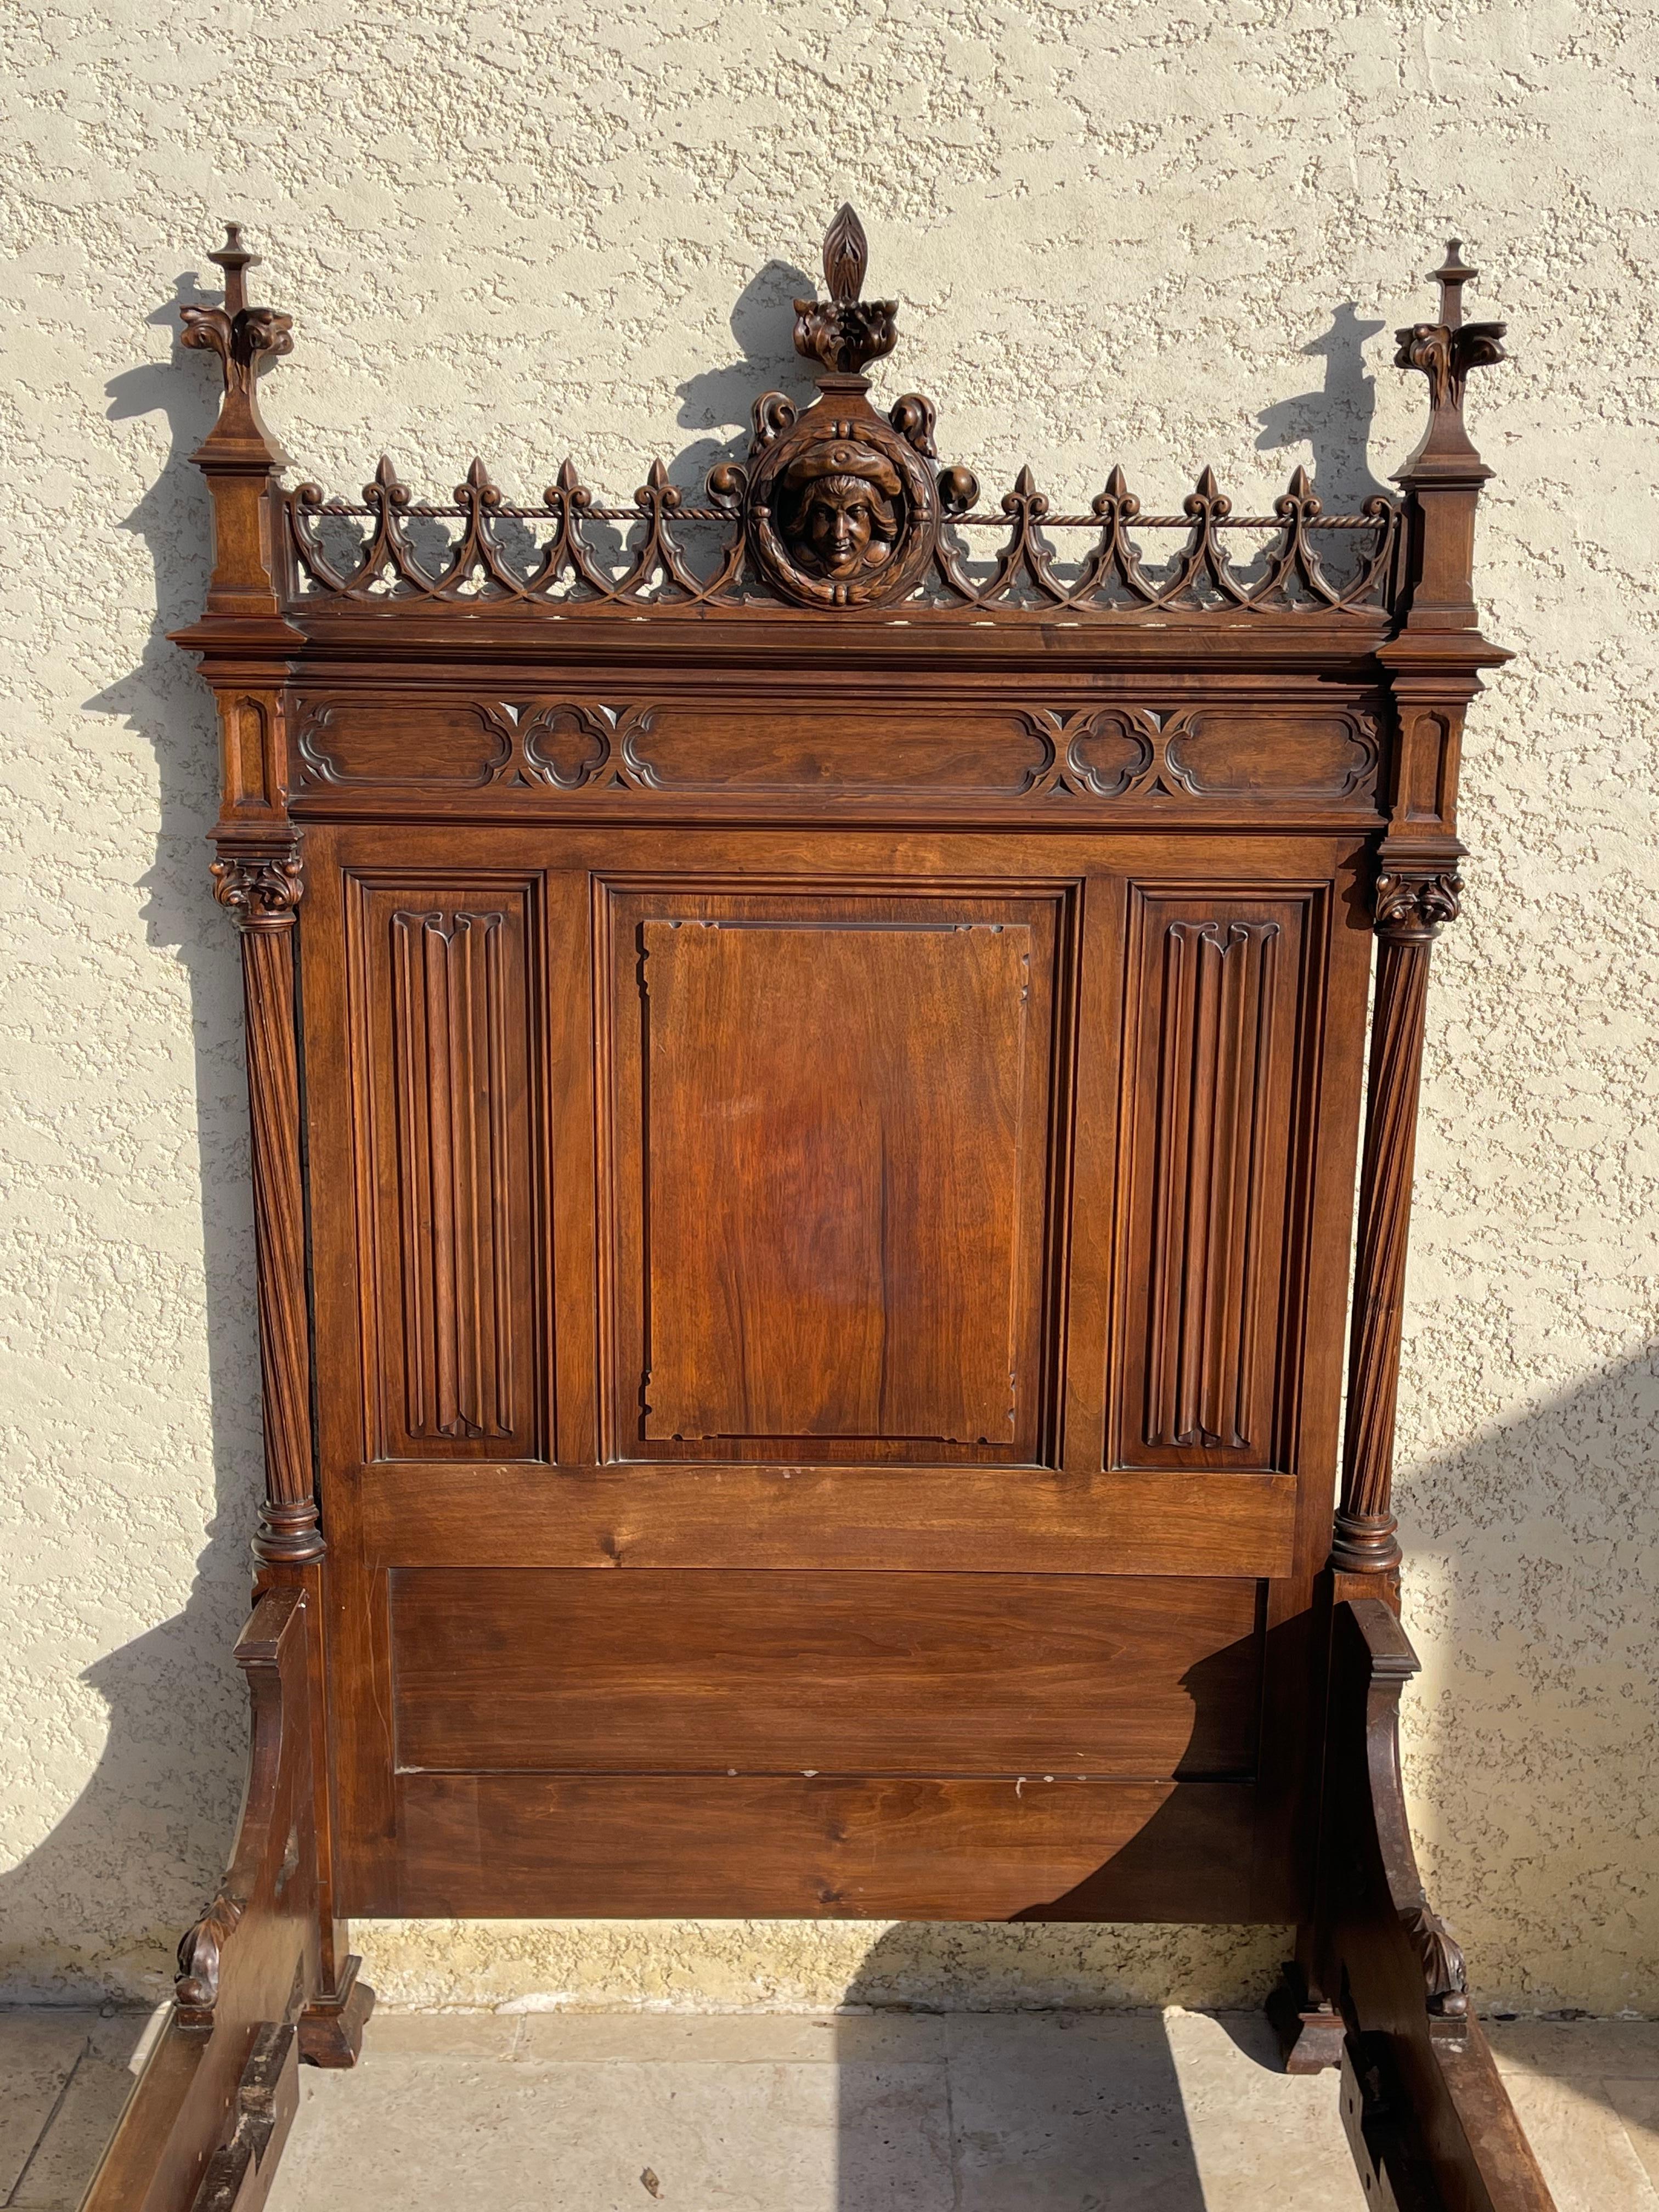 Neo-Gothic style single bed in walnut richly carved with napkin folds, warheads, arrowheads, cabbage leaves. Pediment and footboard featuring a macaroon with the face of a man inside. This bed is in very good condition. This bed can be combined with